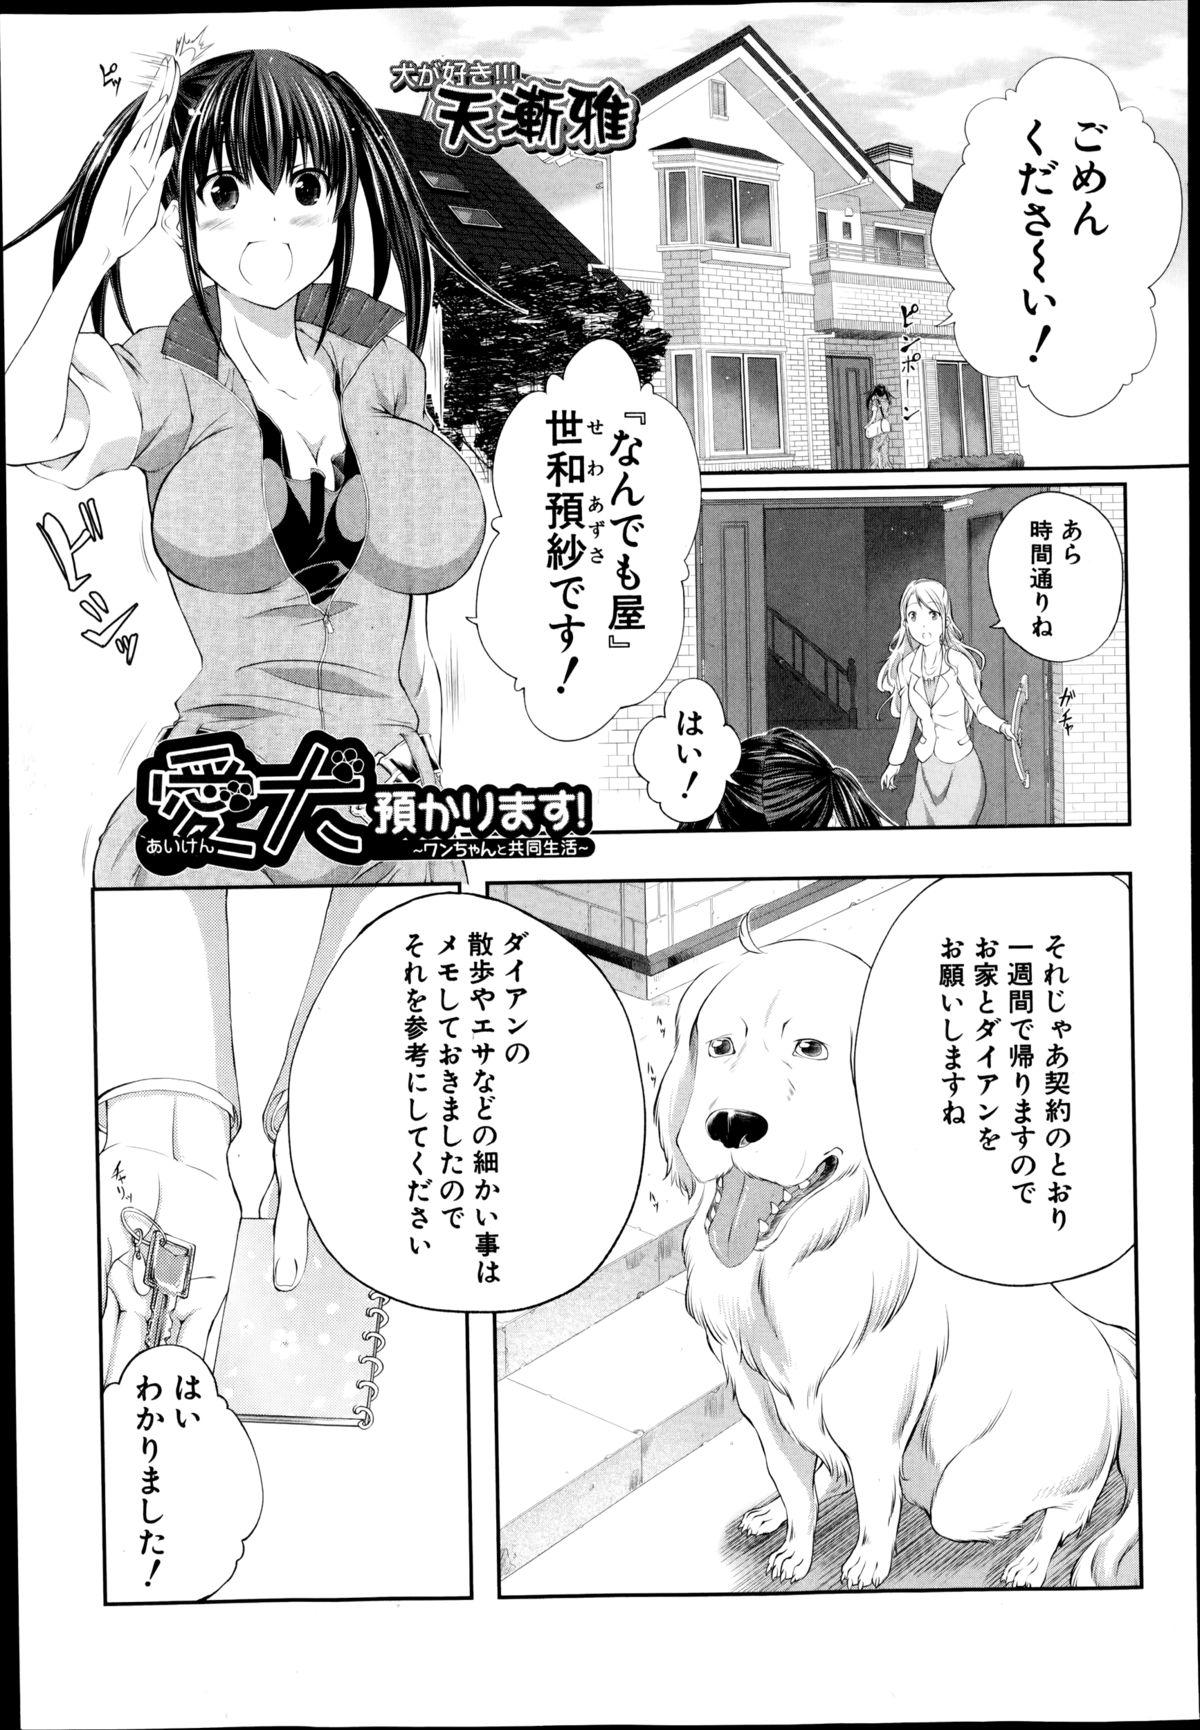 BUSTER COMIC 2014-09 284